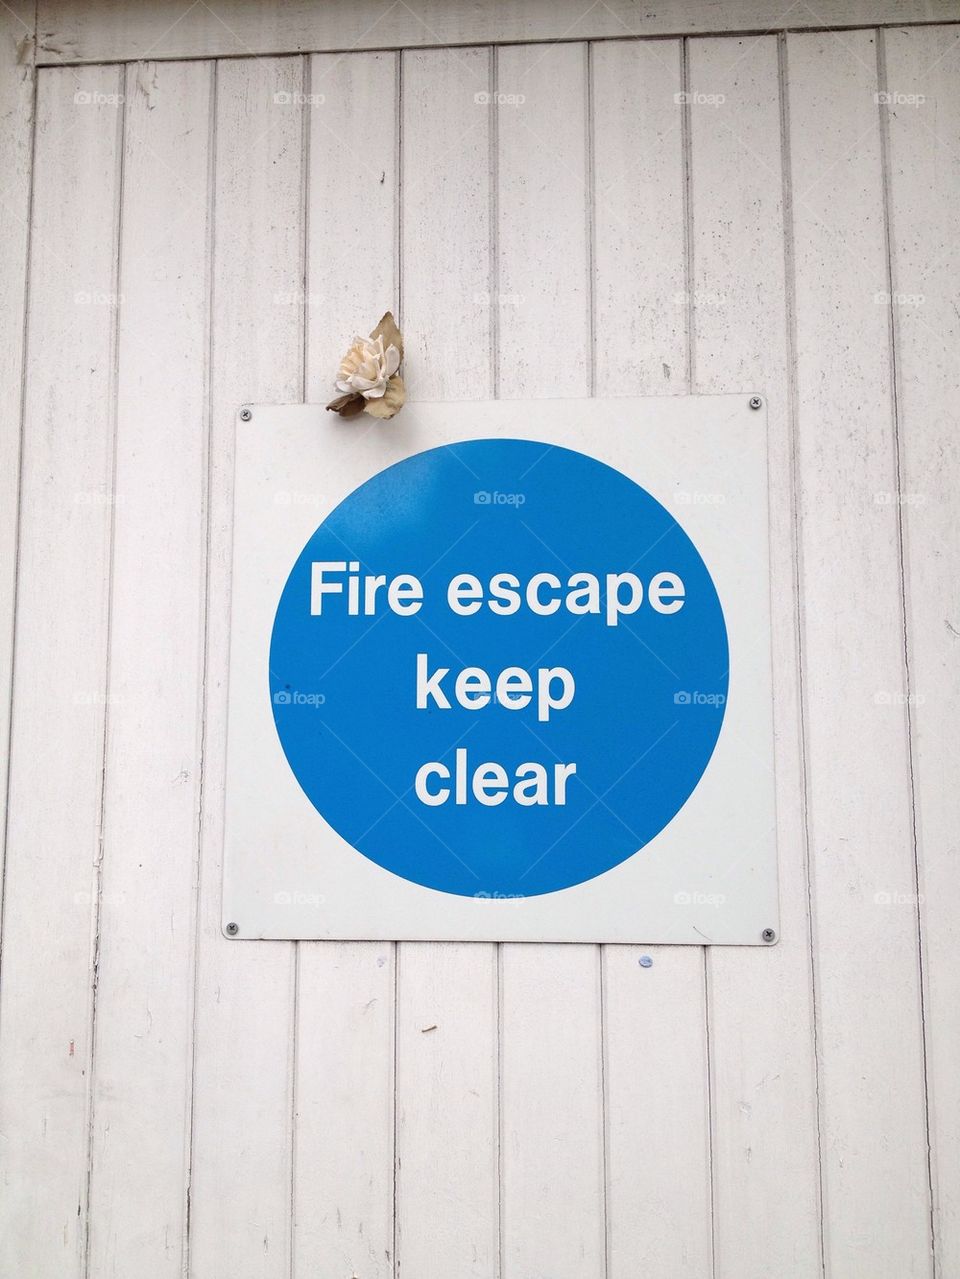 Fire escape keep clear